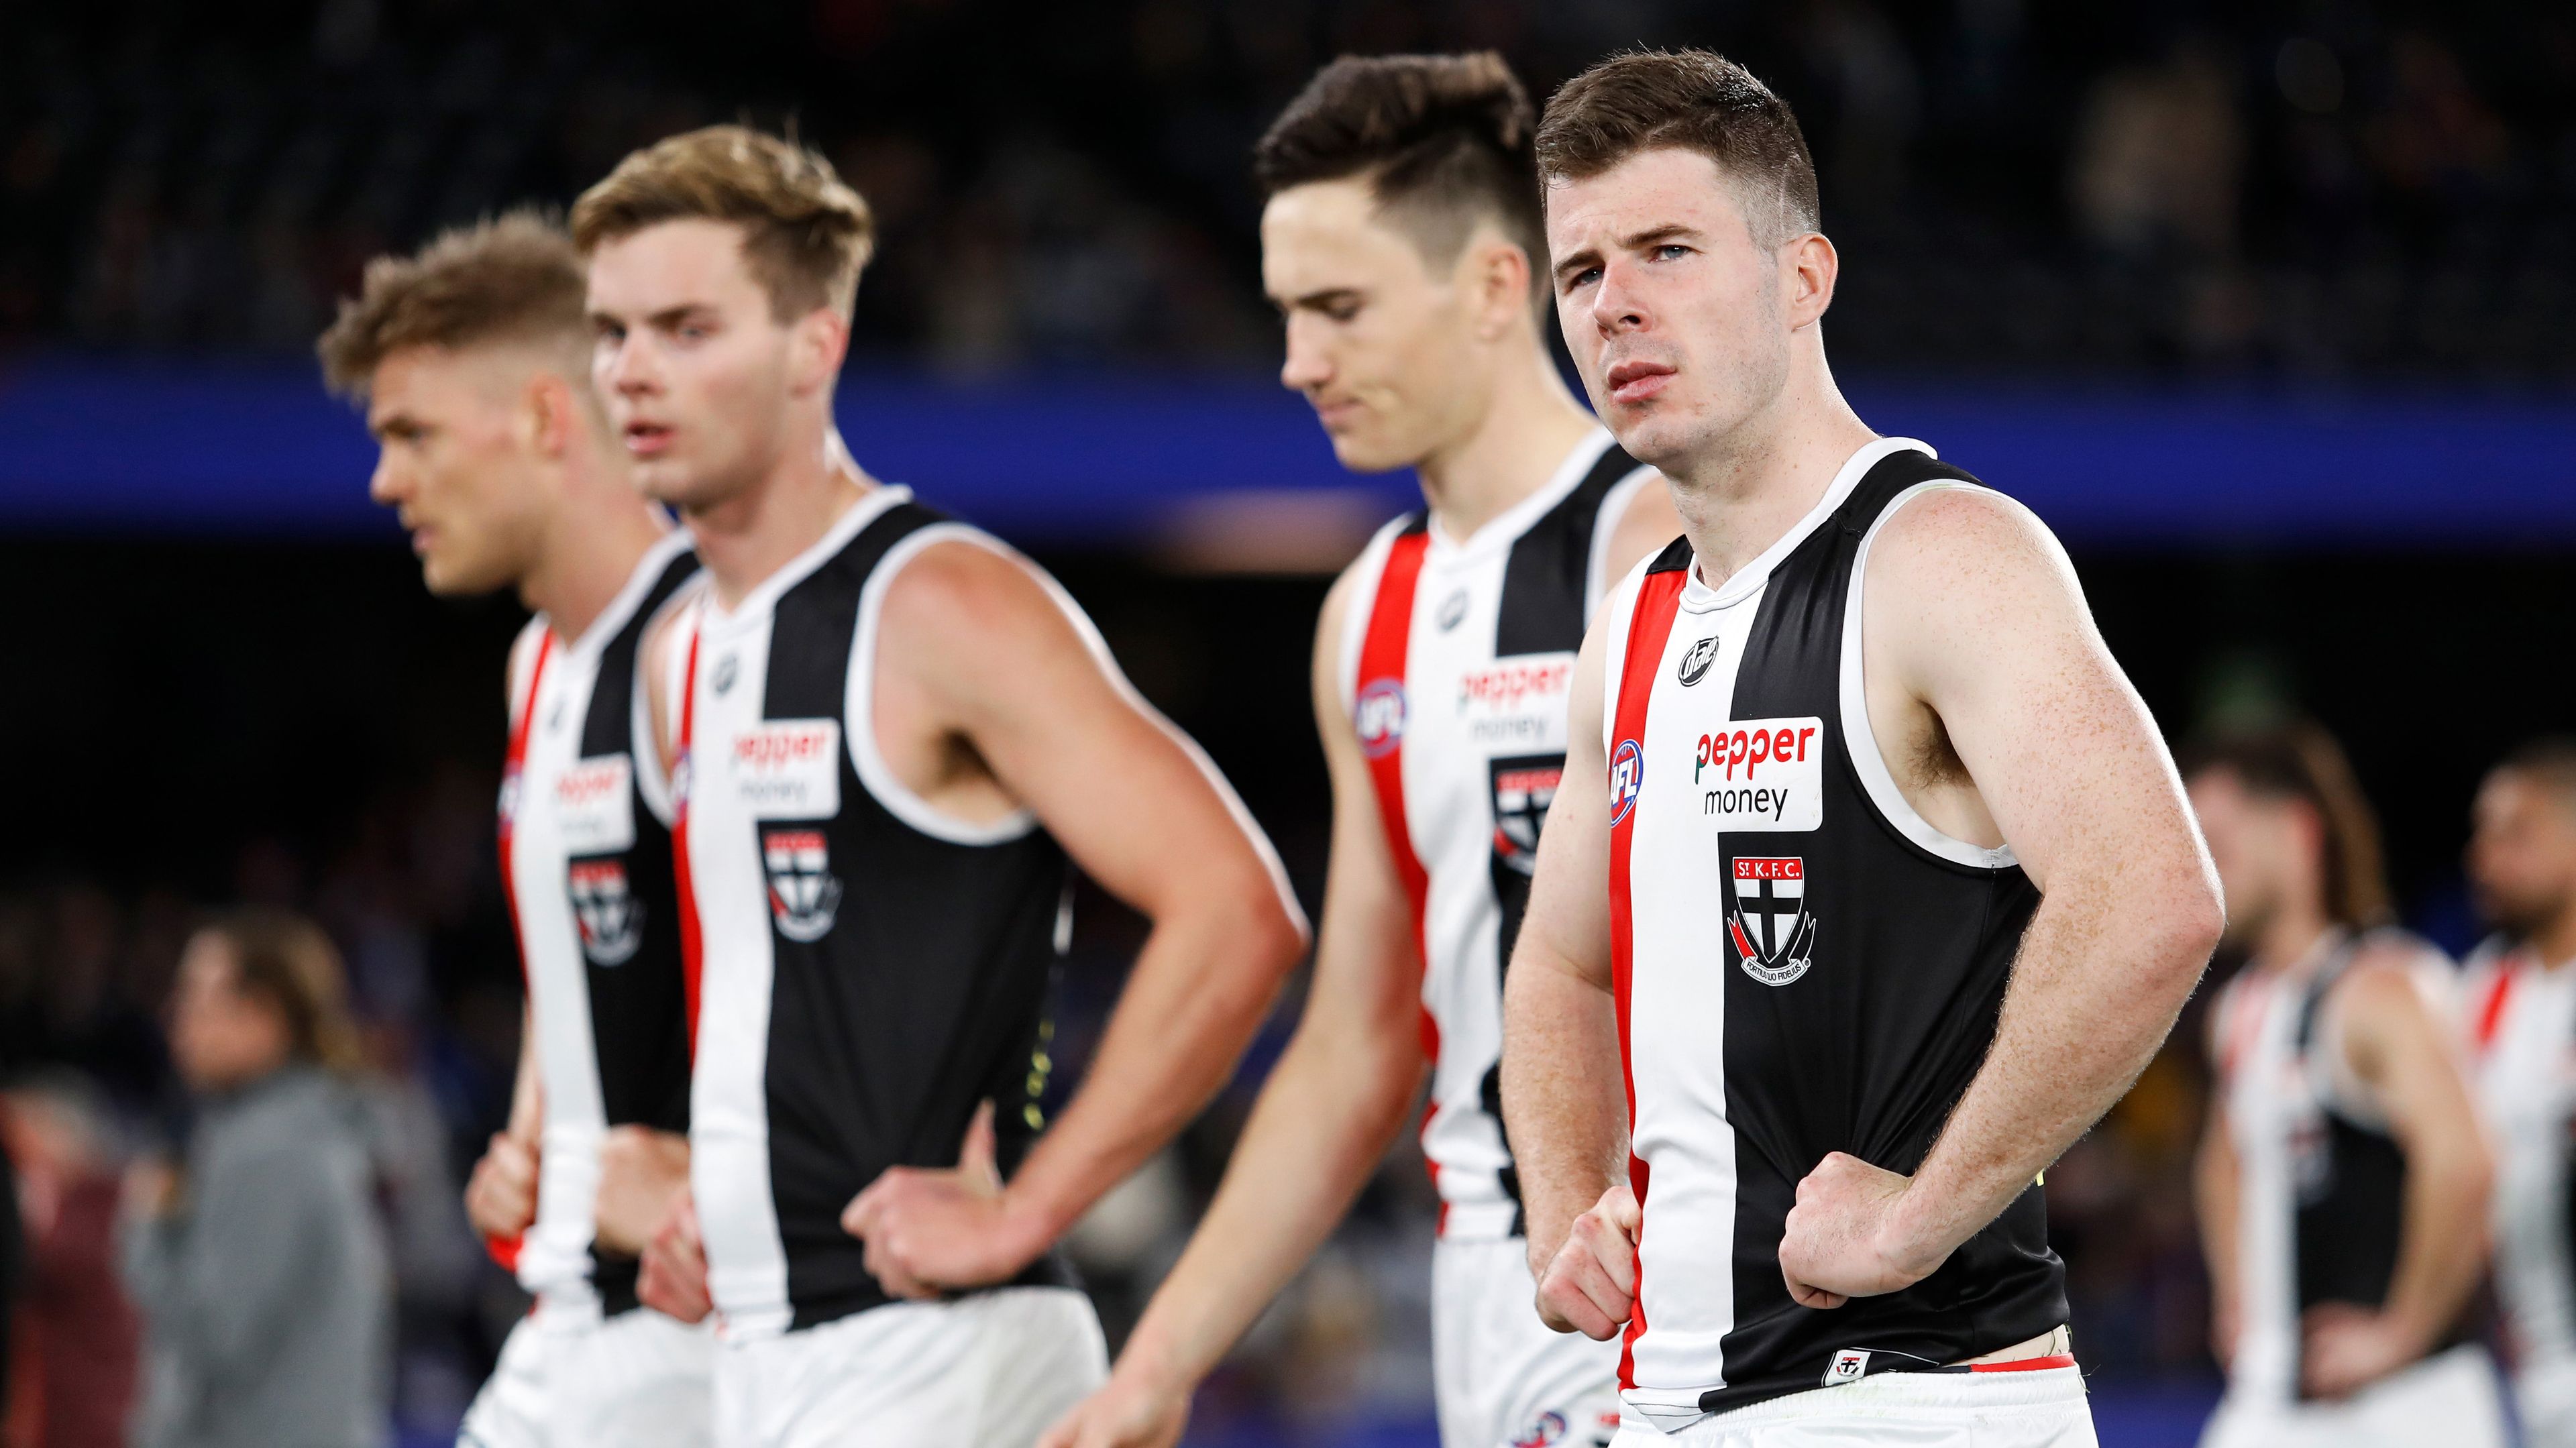 Jack Higgins of the Saints looks dejected after a loss during the 2022 AFL Round 18 match between the Western Bulldogs and the St Kilda Saints at Marvel Stadium on July 15, 2022 in Melbourne, Australia. (Photo by Dylan Burns/AFL Photos via Getty Images)